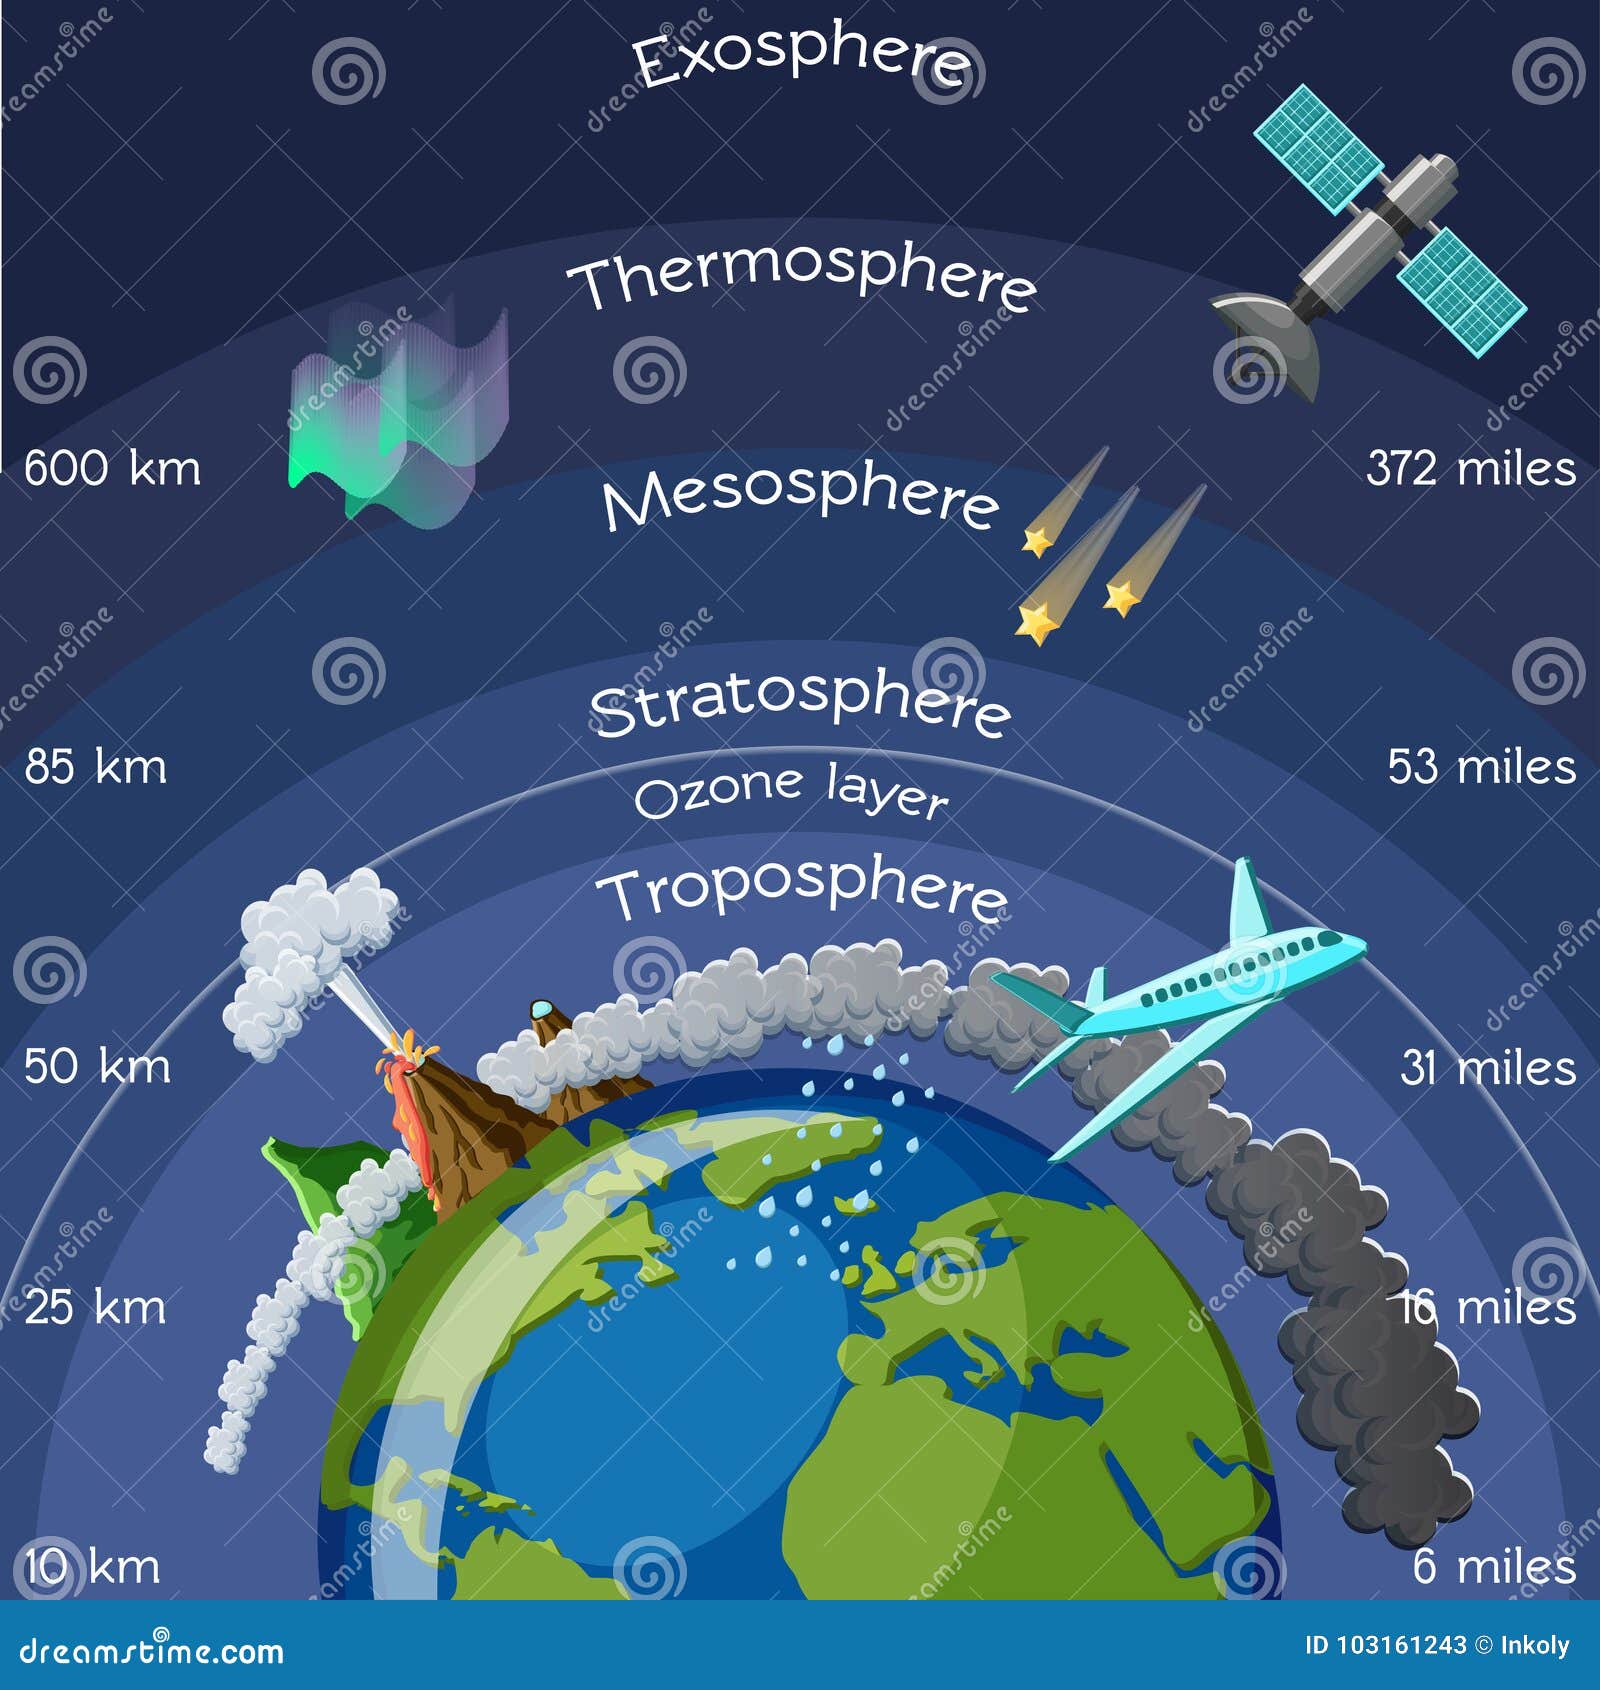 layers of atmosphere infographic.